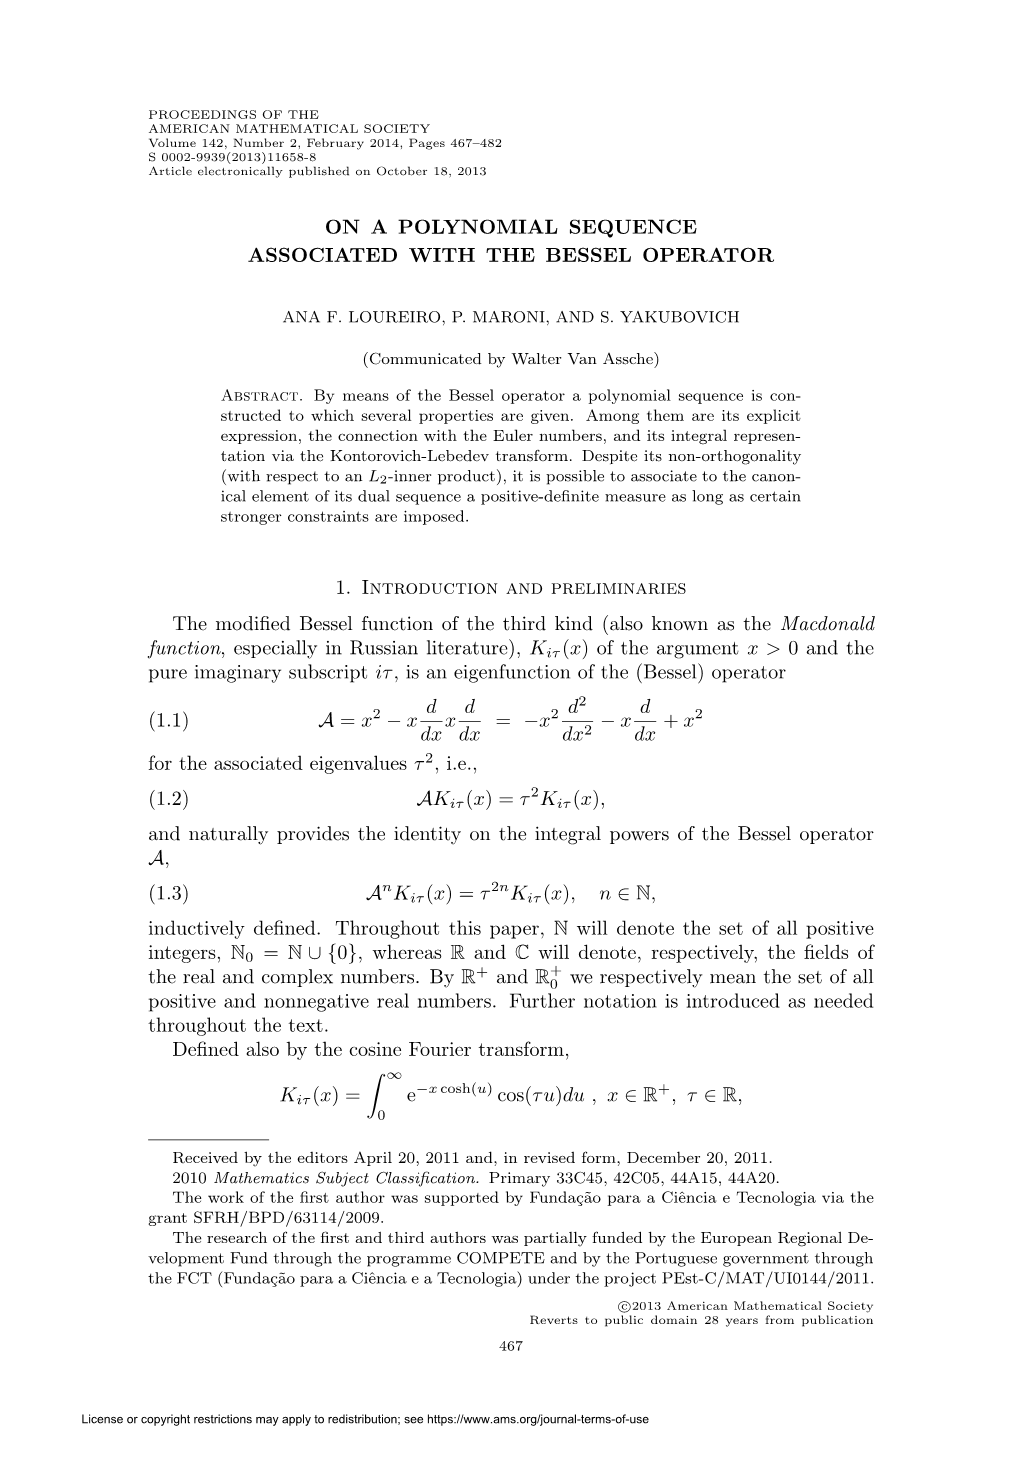 On a Polynomial Sequence Associated with the Bessel Operator